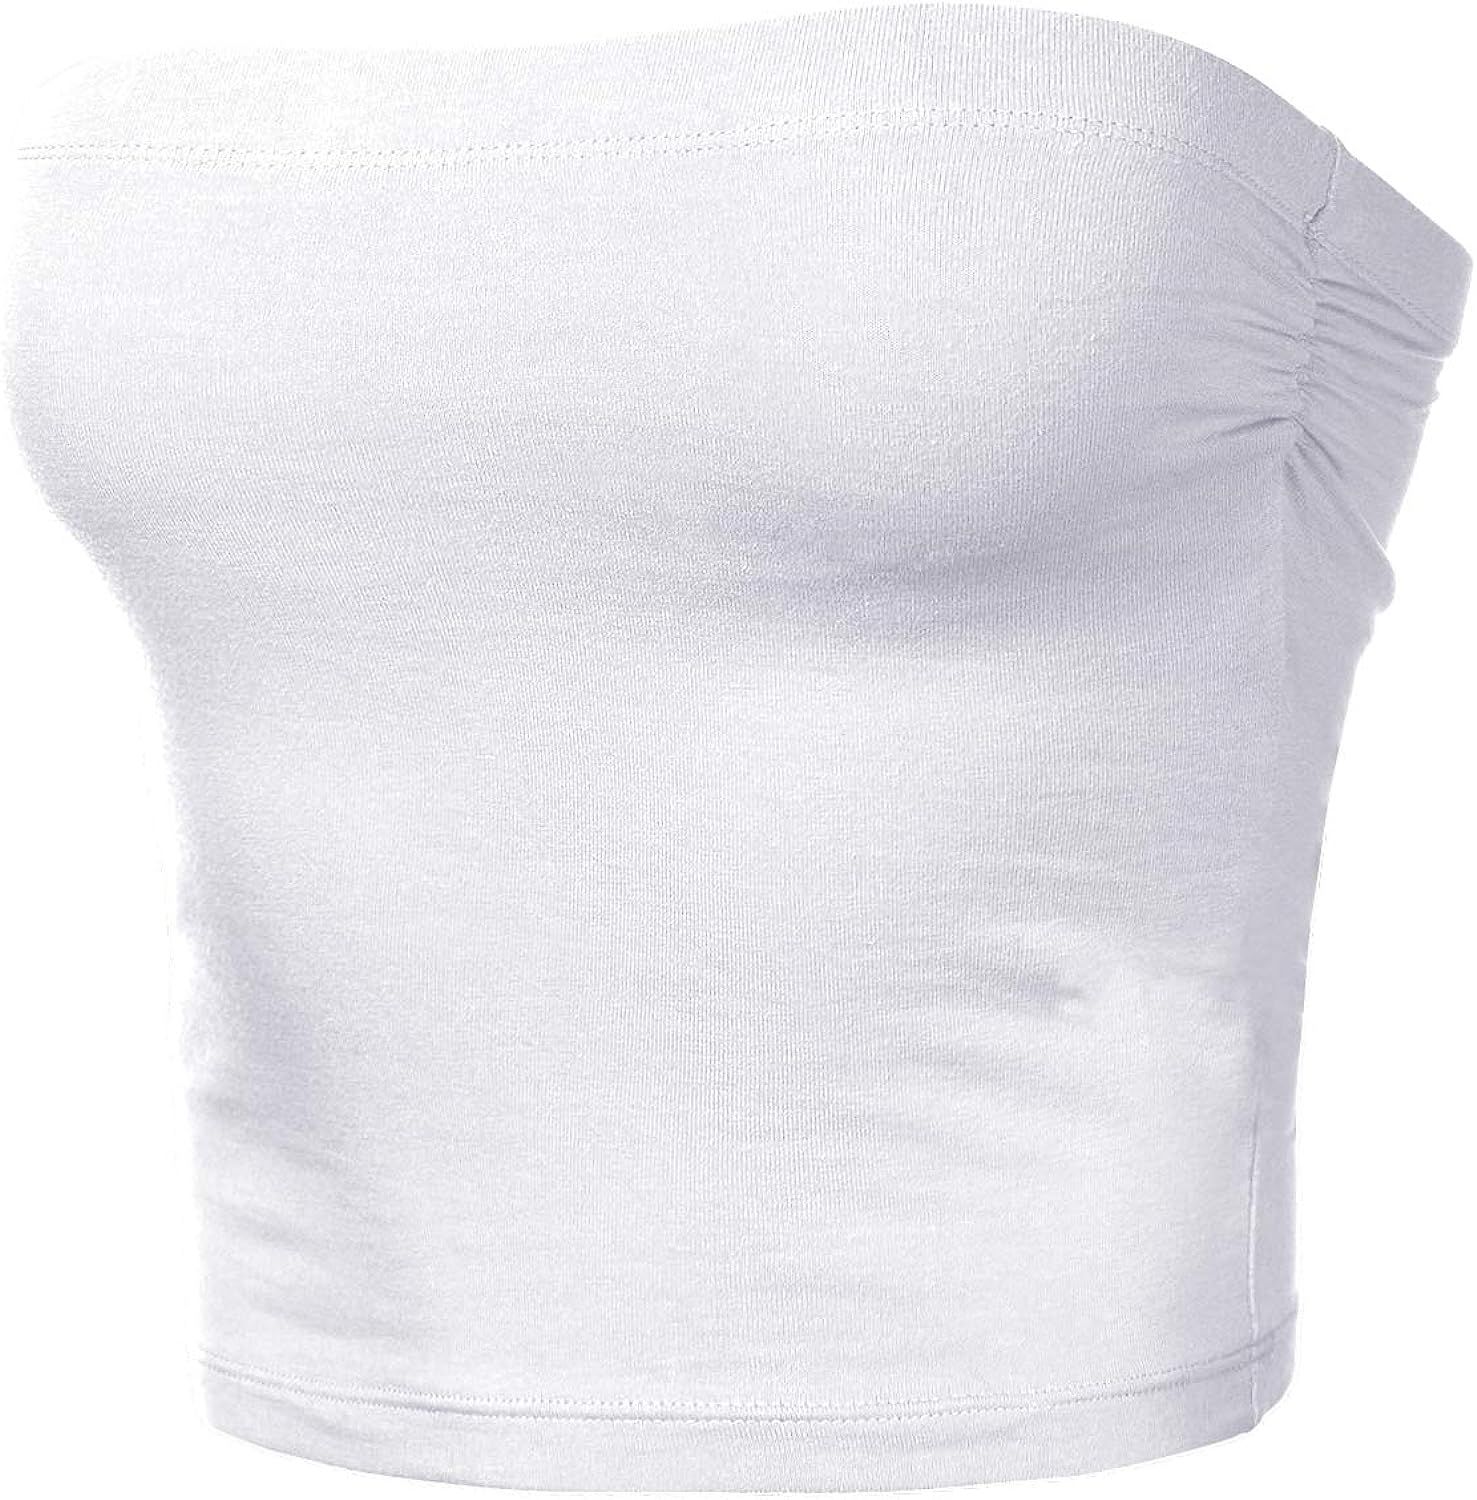 Women's Tube Crop Tops Strapless Cute Sexy Cotton Tops | Amazon (US)